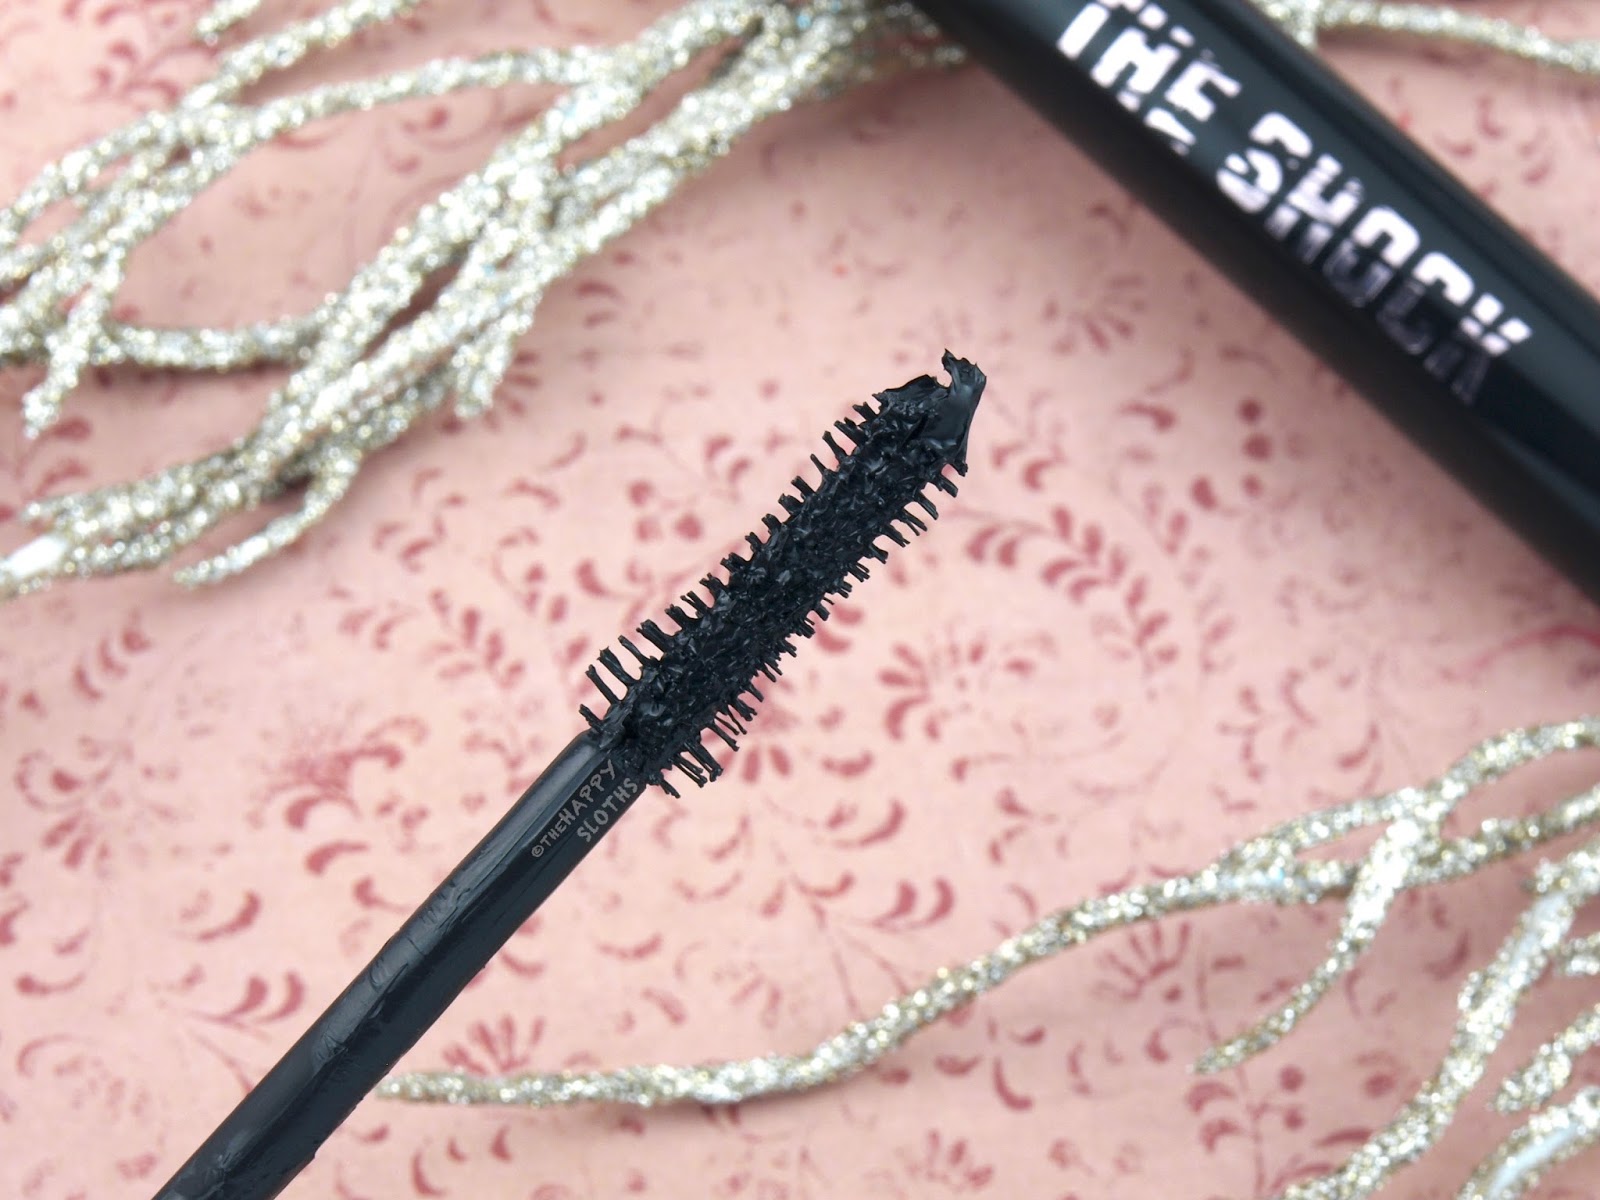 Yves Saint Laurent The Shock Volumizing Mascara: Review and Swatches  The  Happy Sloths: Beauty, Makeup, and Skincare Blog with Reviews and Swatches